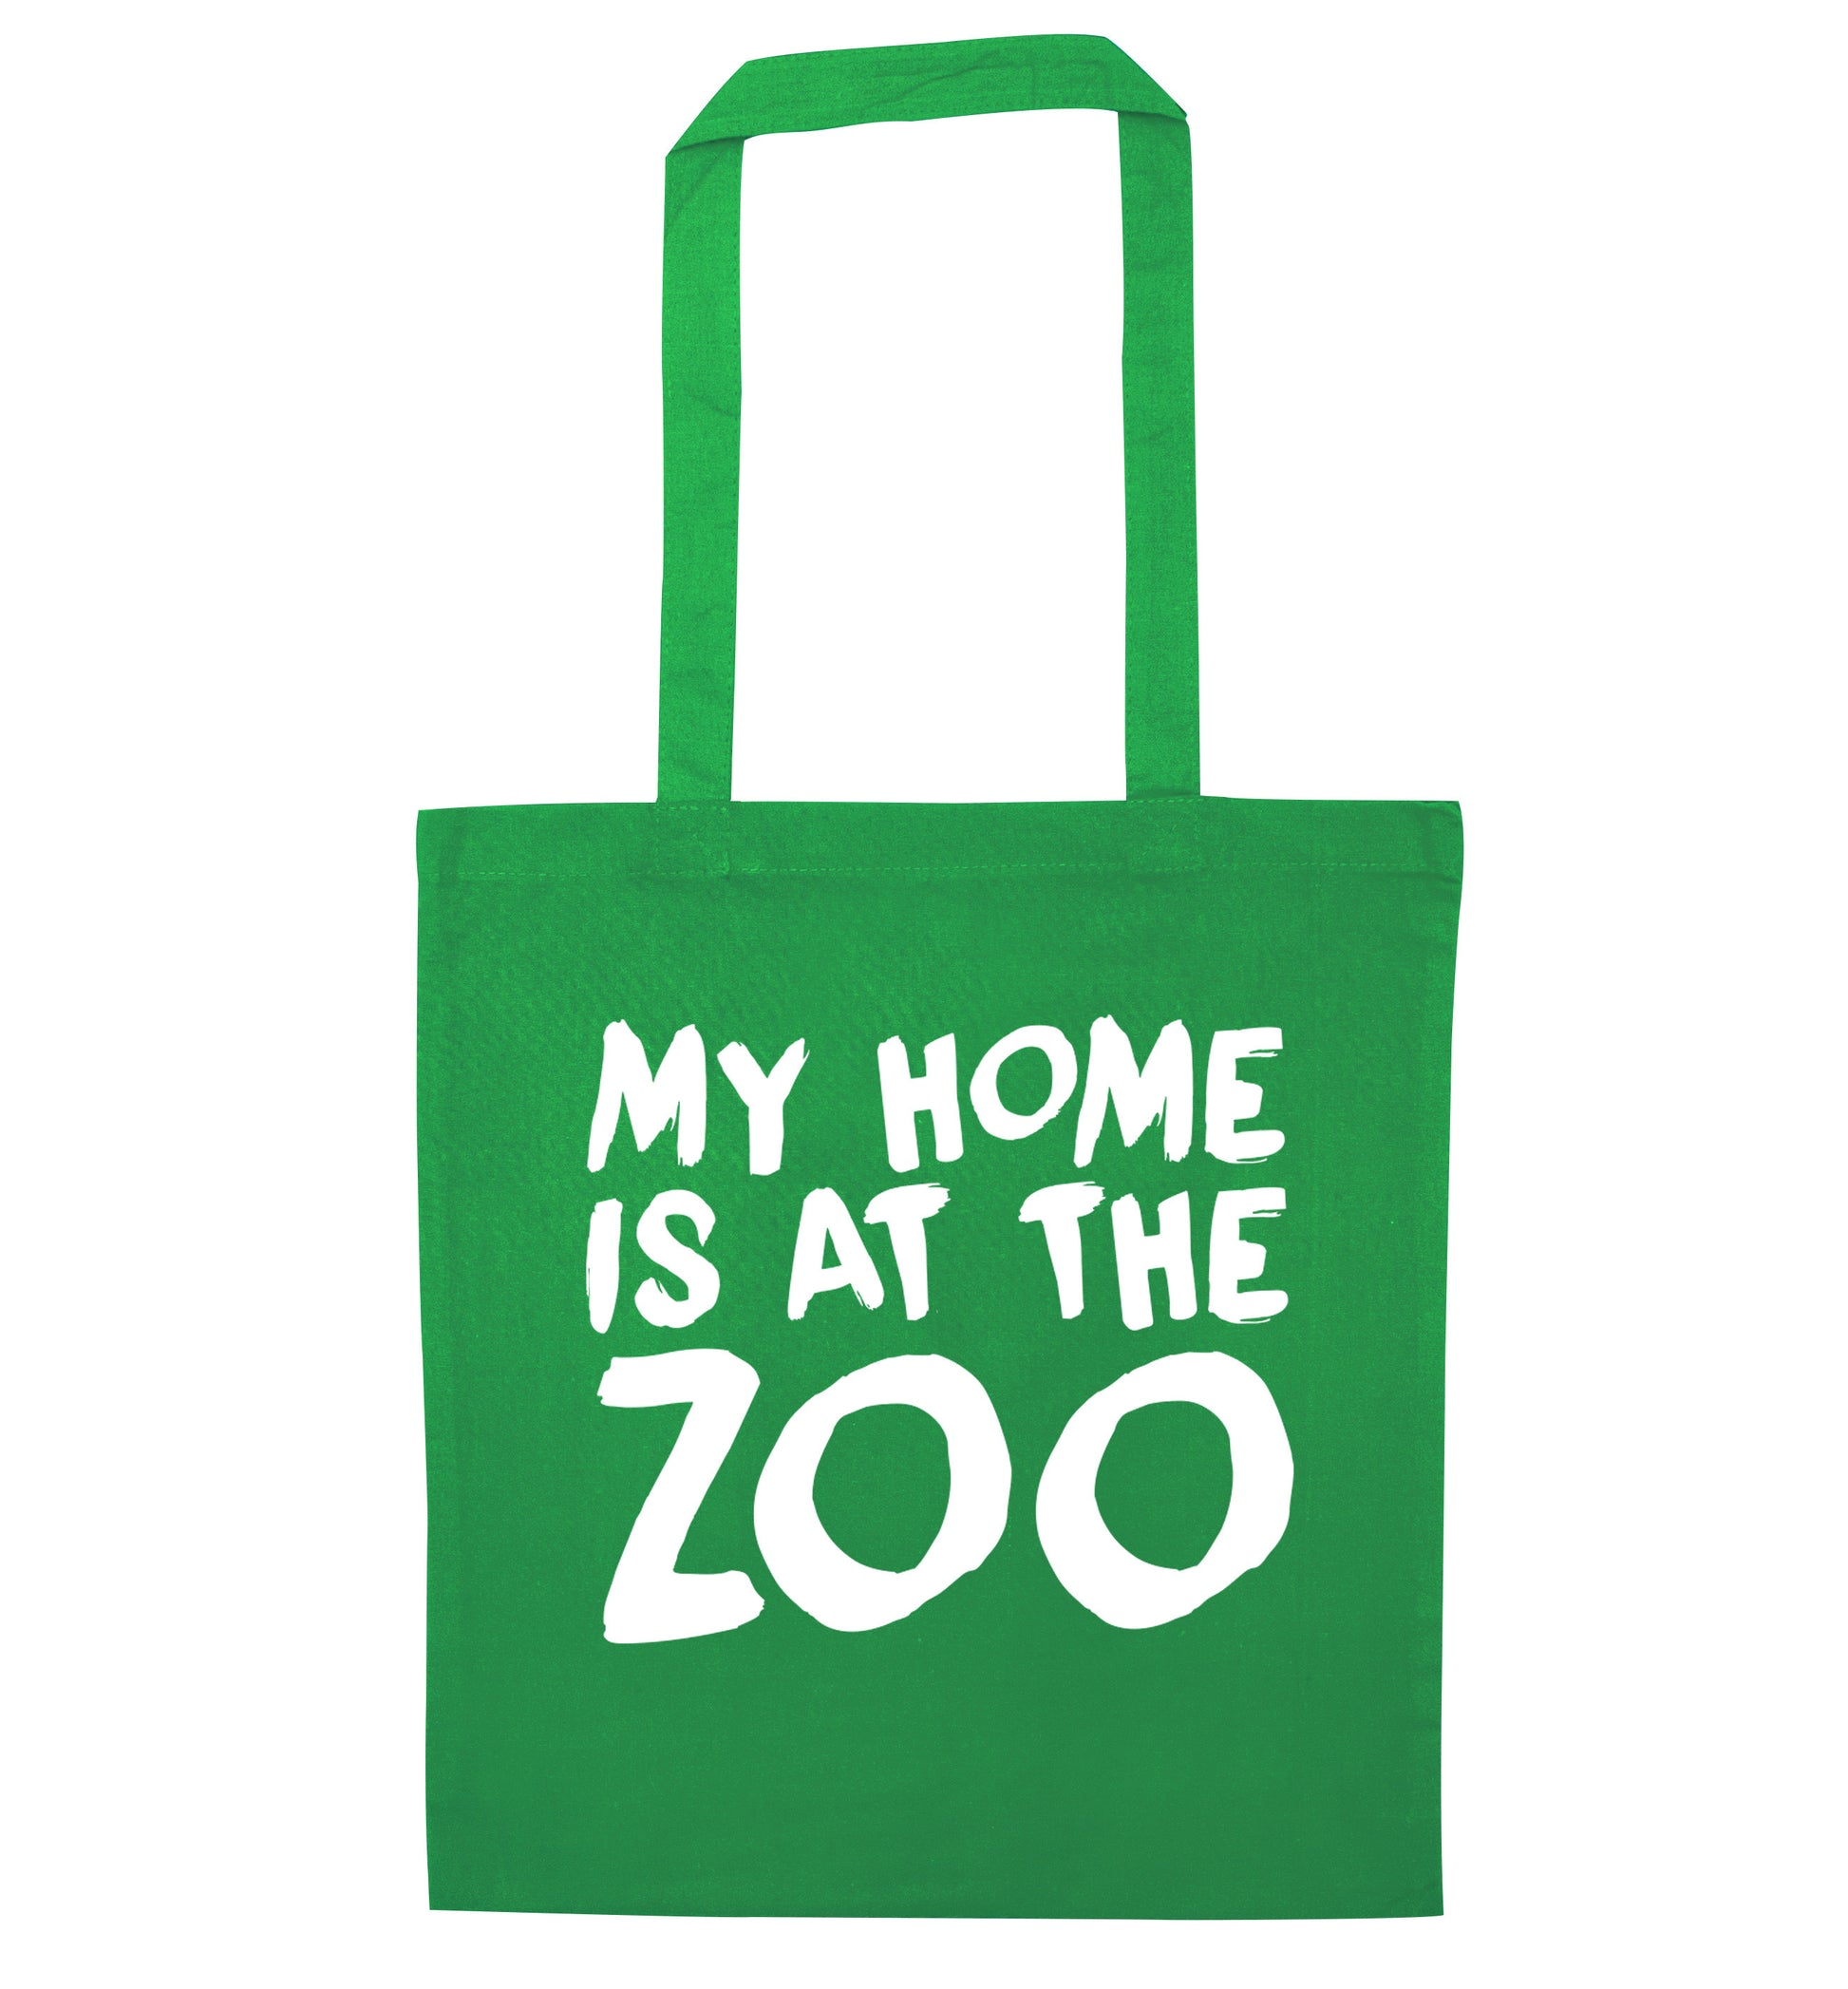 My home is at the zoo green tote bag